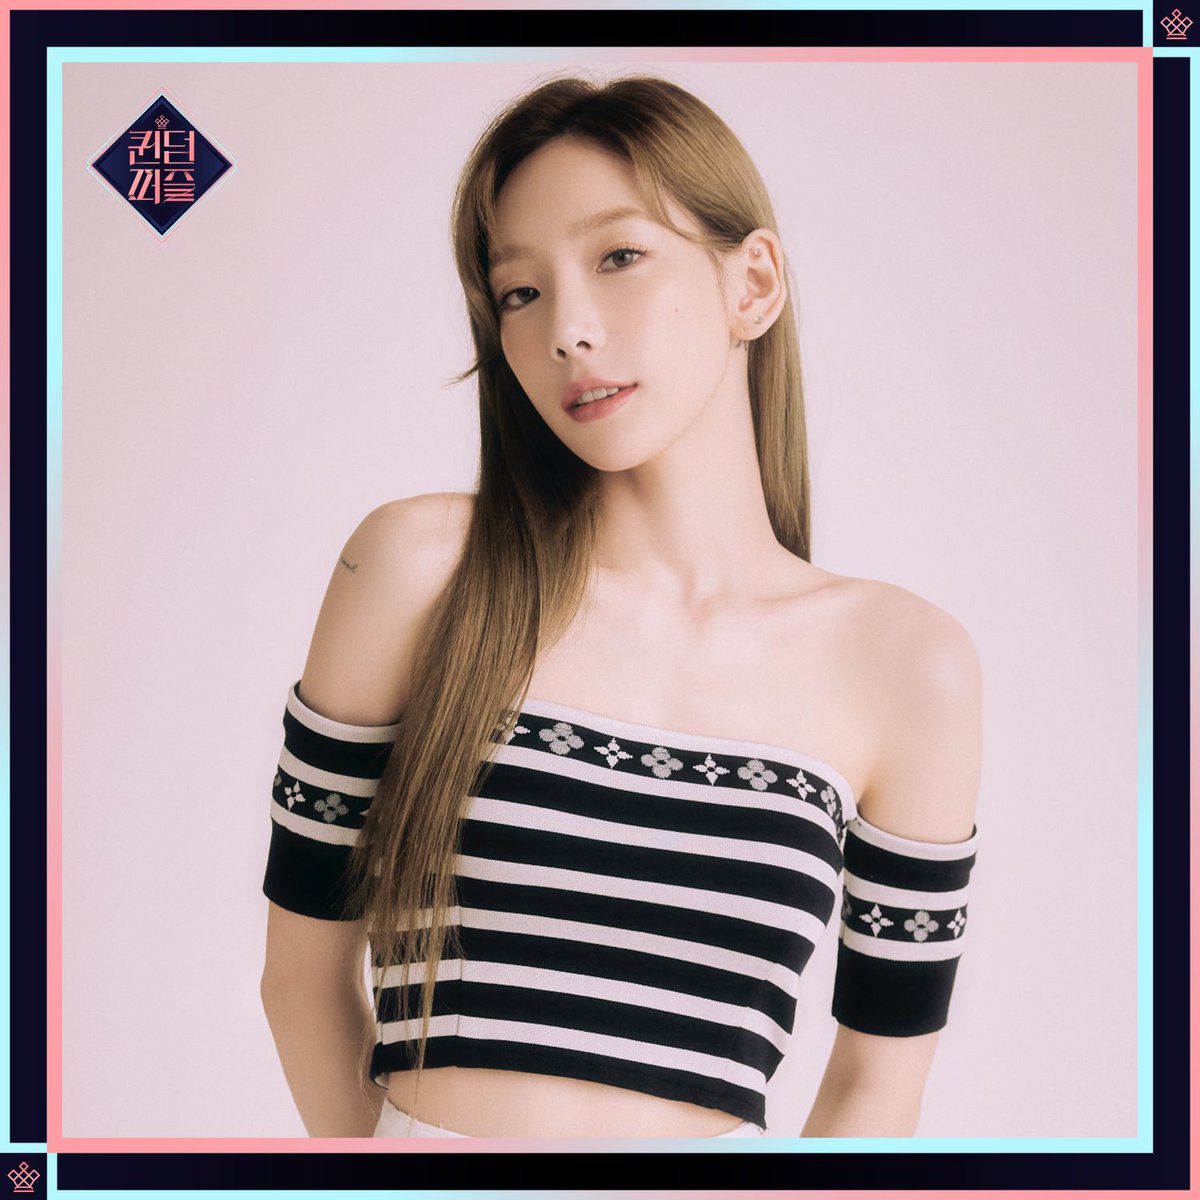 [Update] TAEYEON will return as MC for Mnet ‘퀸덤퍼즐 / Queendom Puzzle’ 2023 Coming Soon

#taeyeon #태연 #kimtaeyeon #김태연 #mctaeyeon #queendompuzzle #퀸덤퍼즐 #mnet #엠넷 #queendom #퀸덤 #puzzle #퍼즐
230424